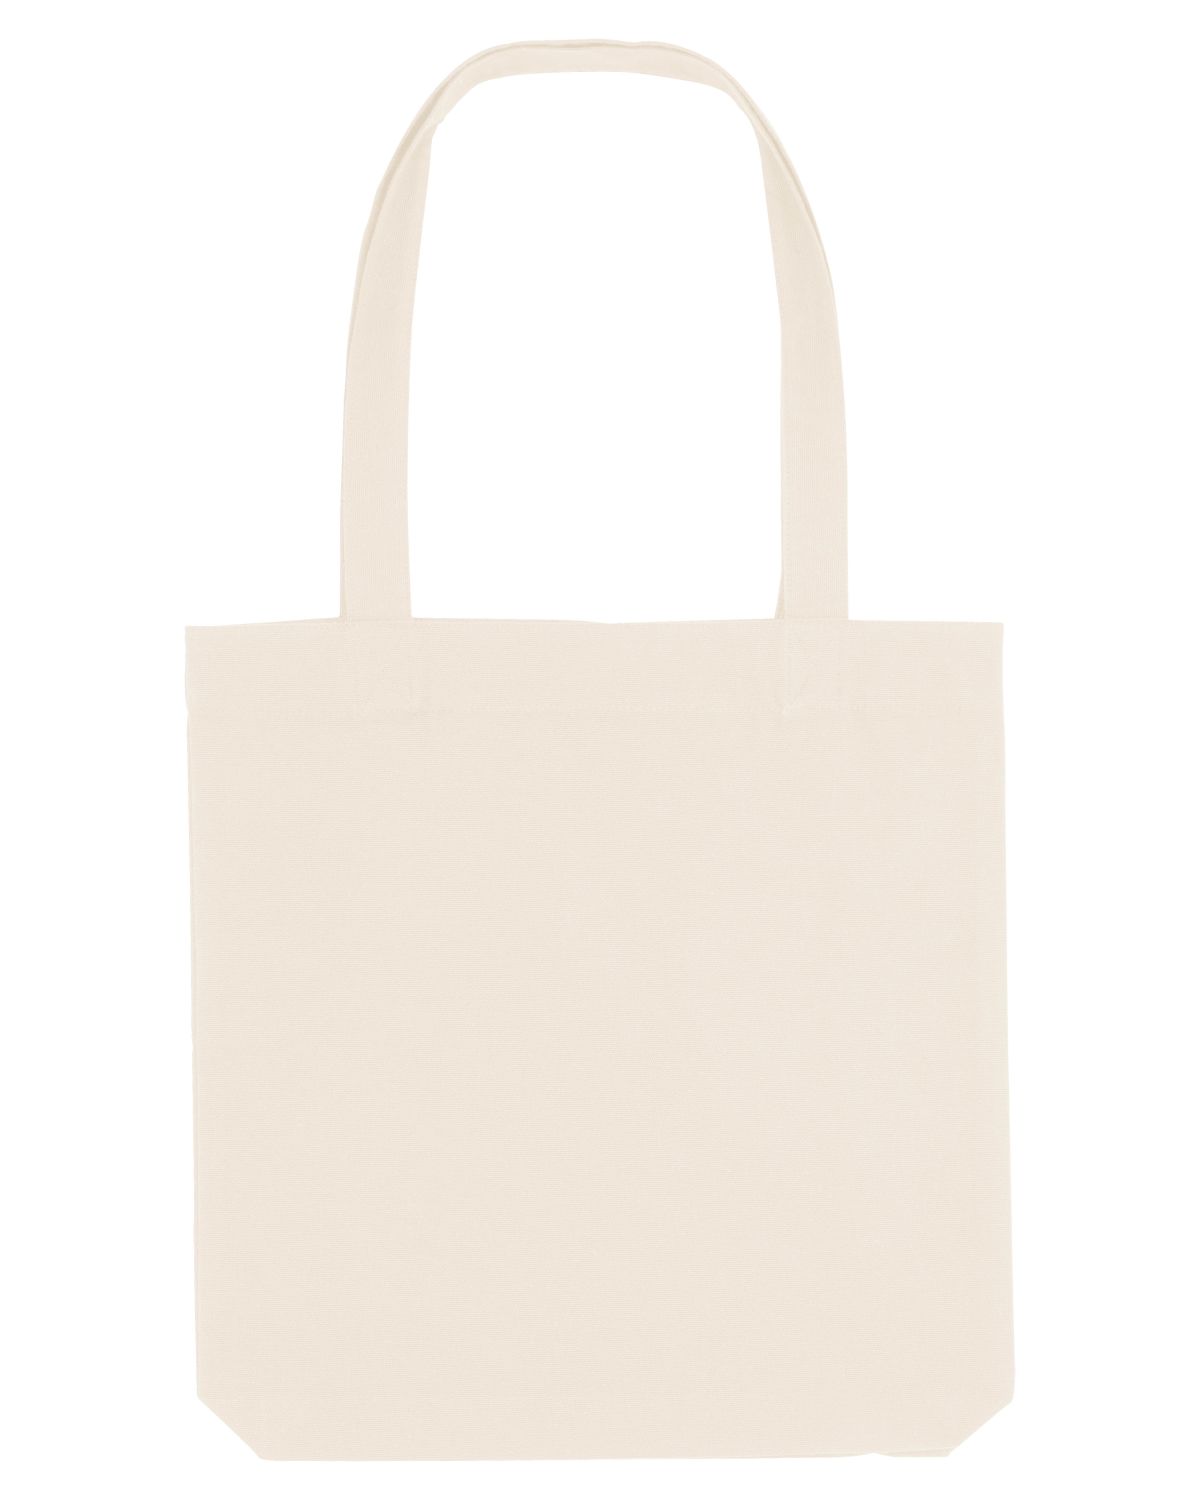 MECILLA [36760] RECYCLED WOVEN TOTE BAG